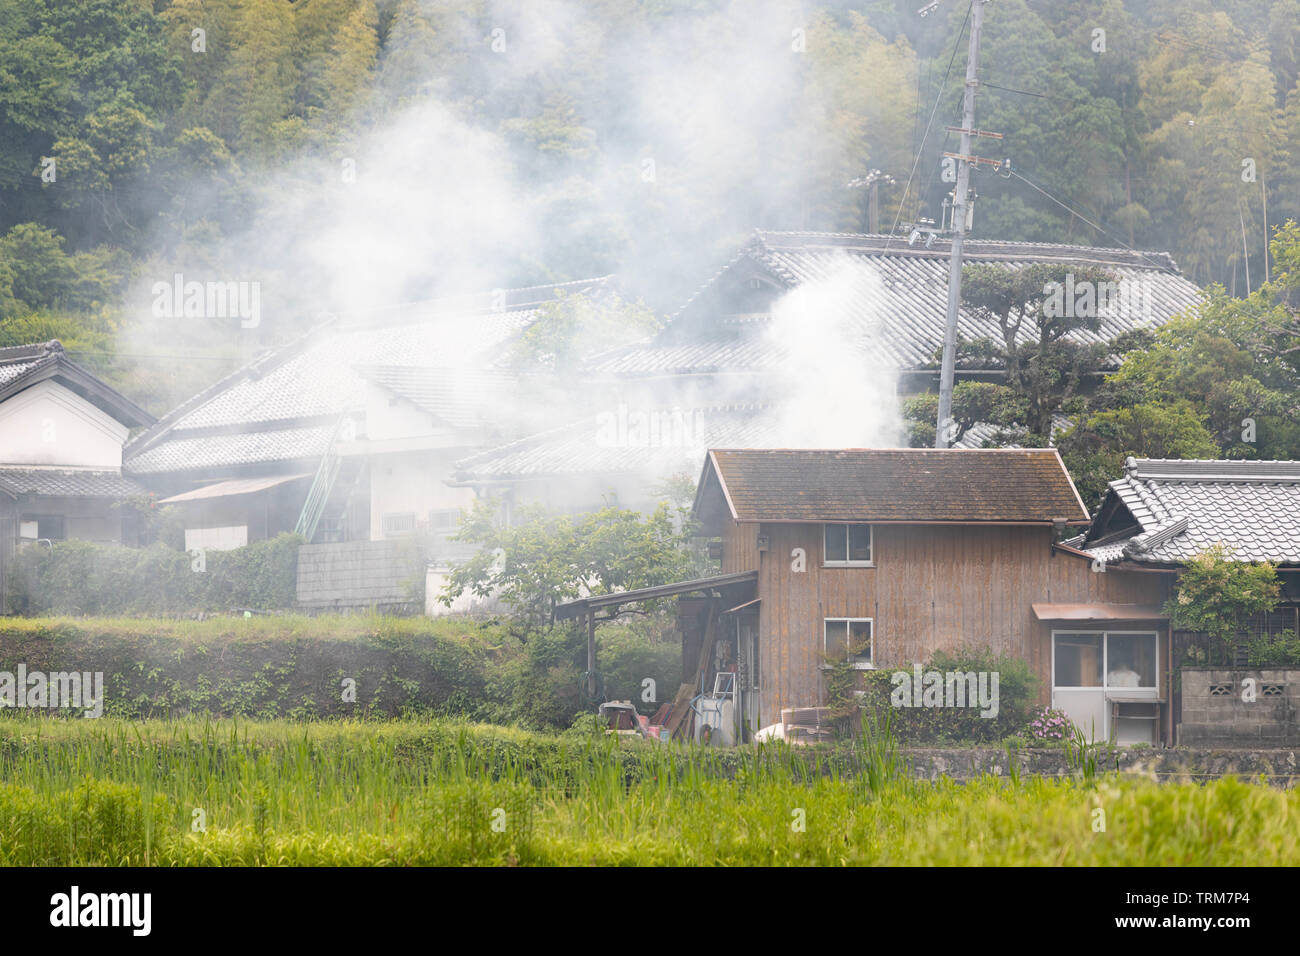 Smoke billows from traditional Japanese farming village due to controlled burn Stock Photo